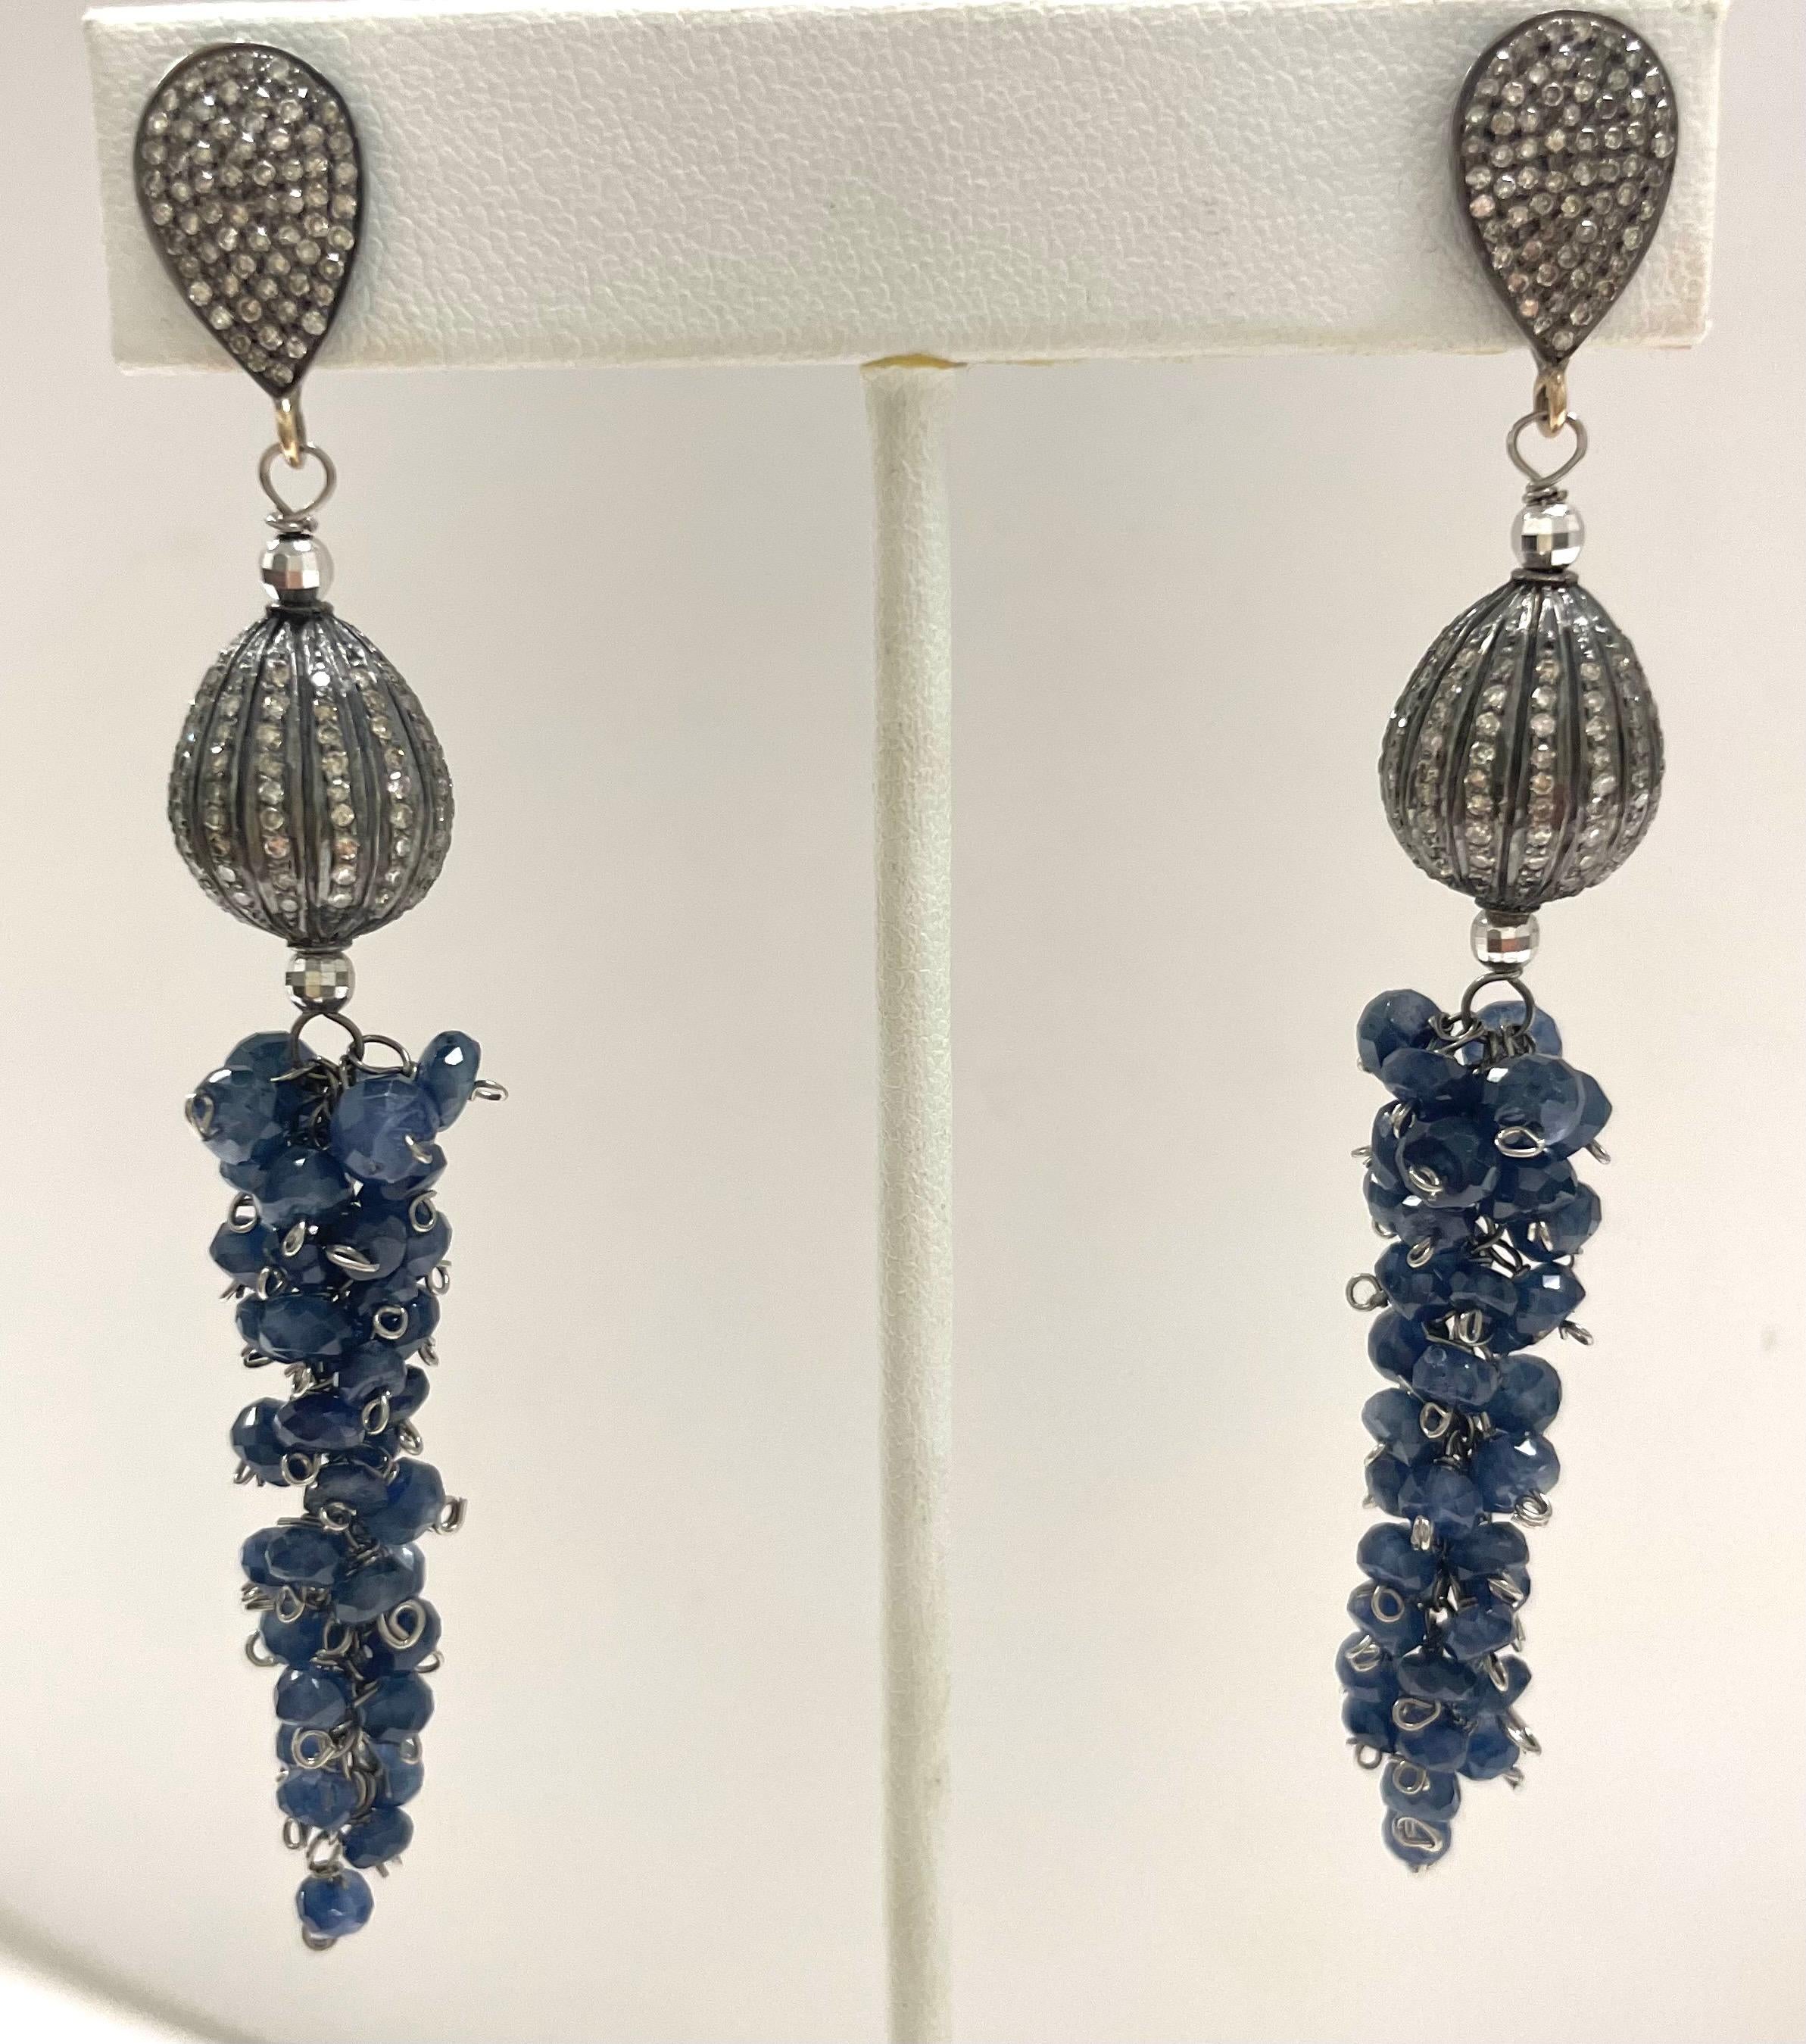 Description
Luscious and whimsical cluster of natural untreated blue sapphires dangling from pear shape stud earrings enhanced with pave diamonds.
Item # E3291
Check out matching necklace (see photo), Item # N3383

Materials and Weight
Blue